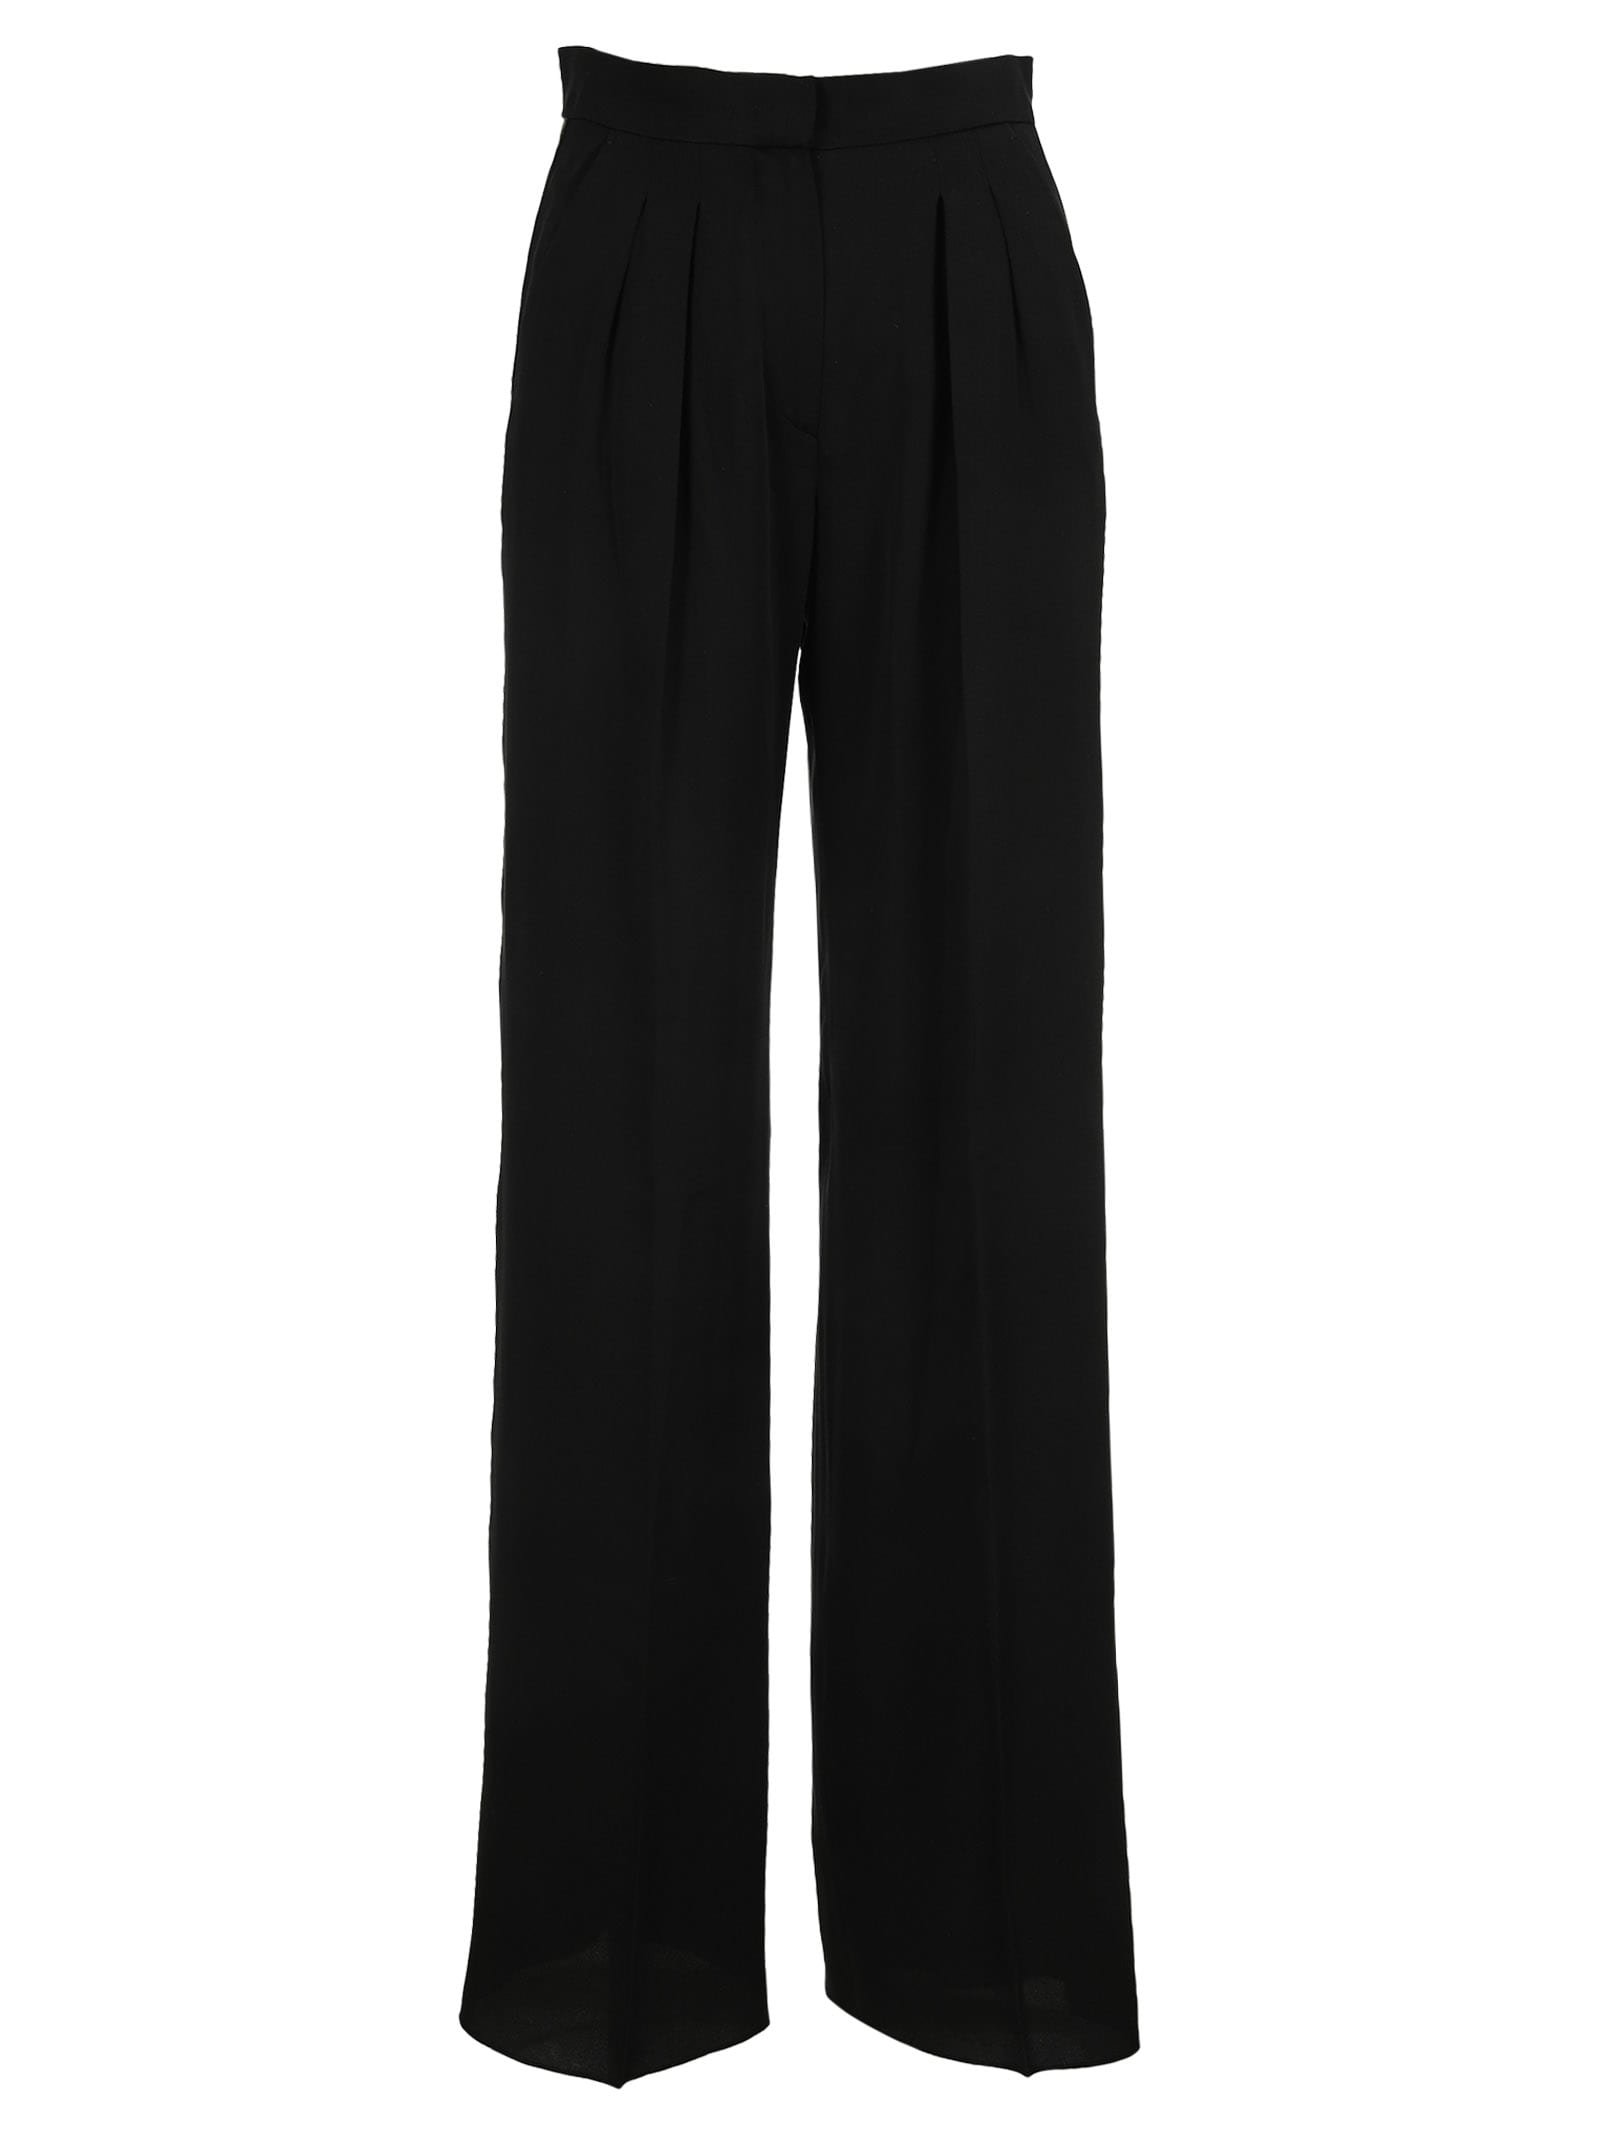 Max Mara High Waisted Contrasting Trim Trousers